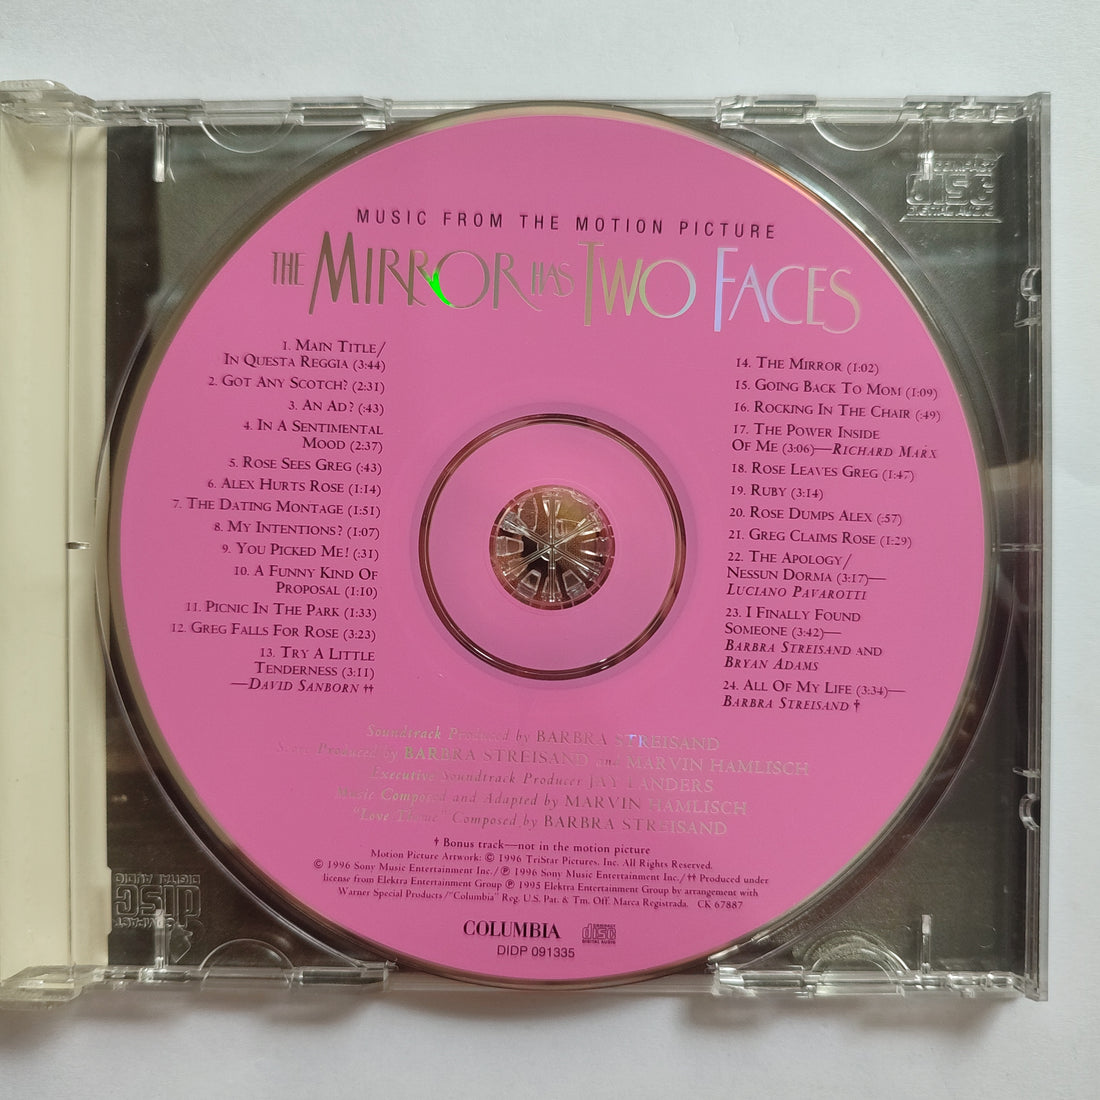 Barbra Streisand / Marvin Hamlisch - The Mirror Has Two Faces (CD) (NM or M-)